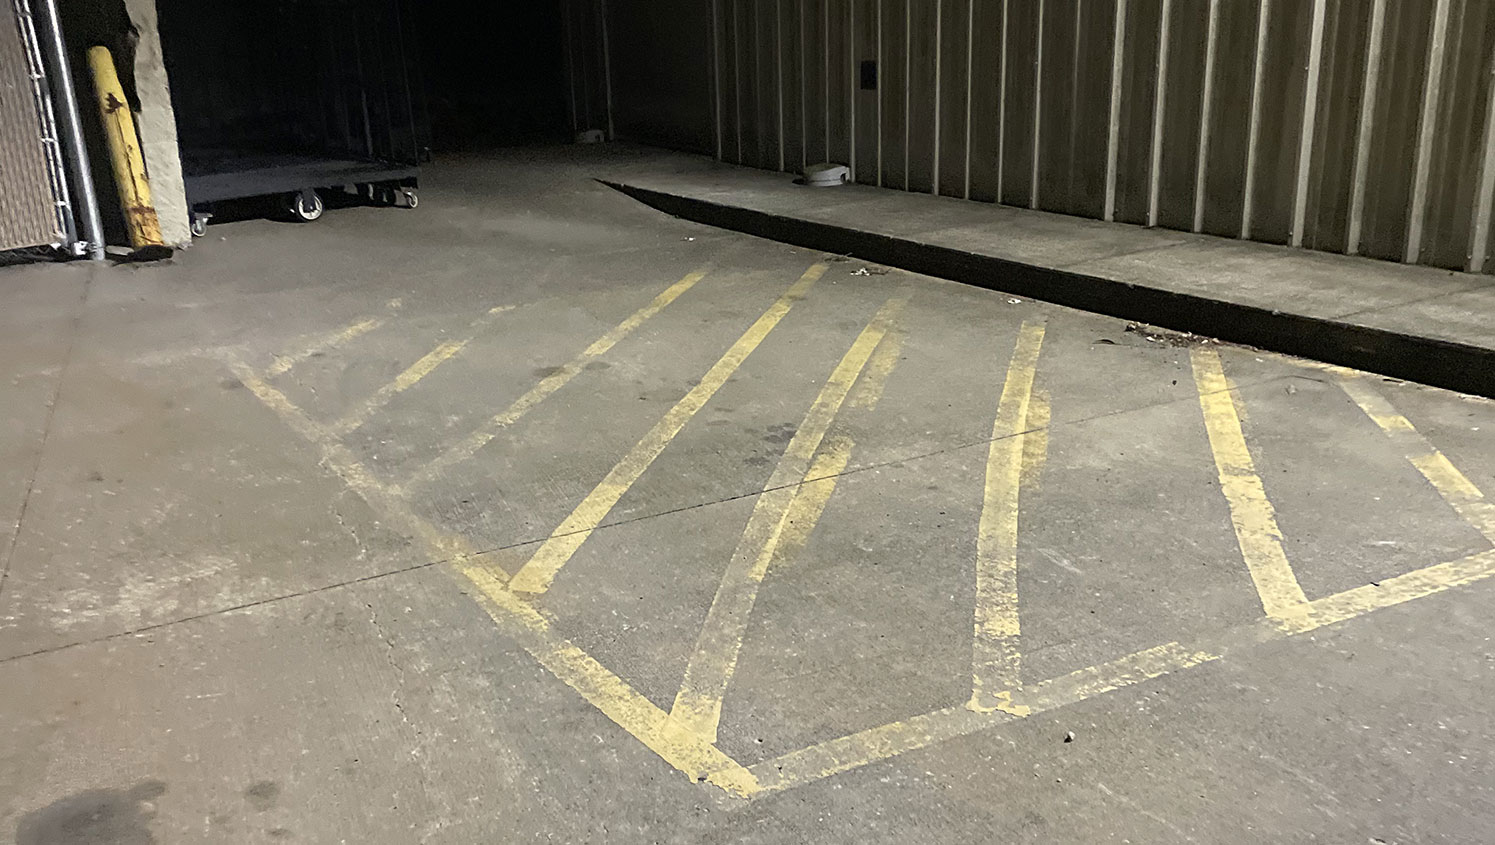 worn-out safety markings in parking lot